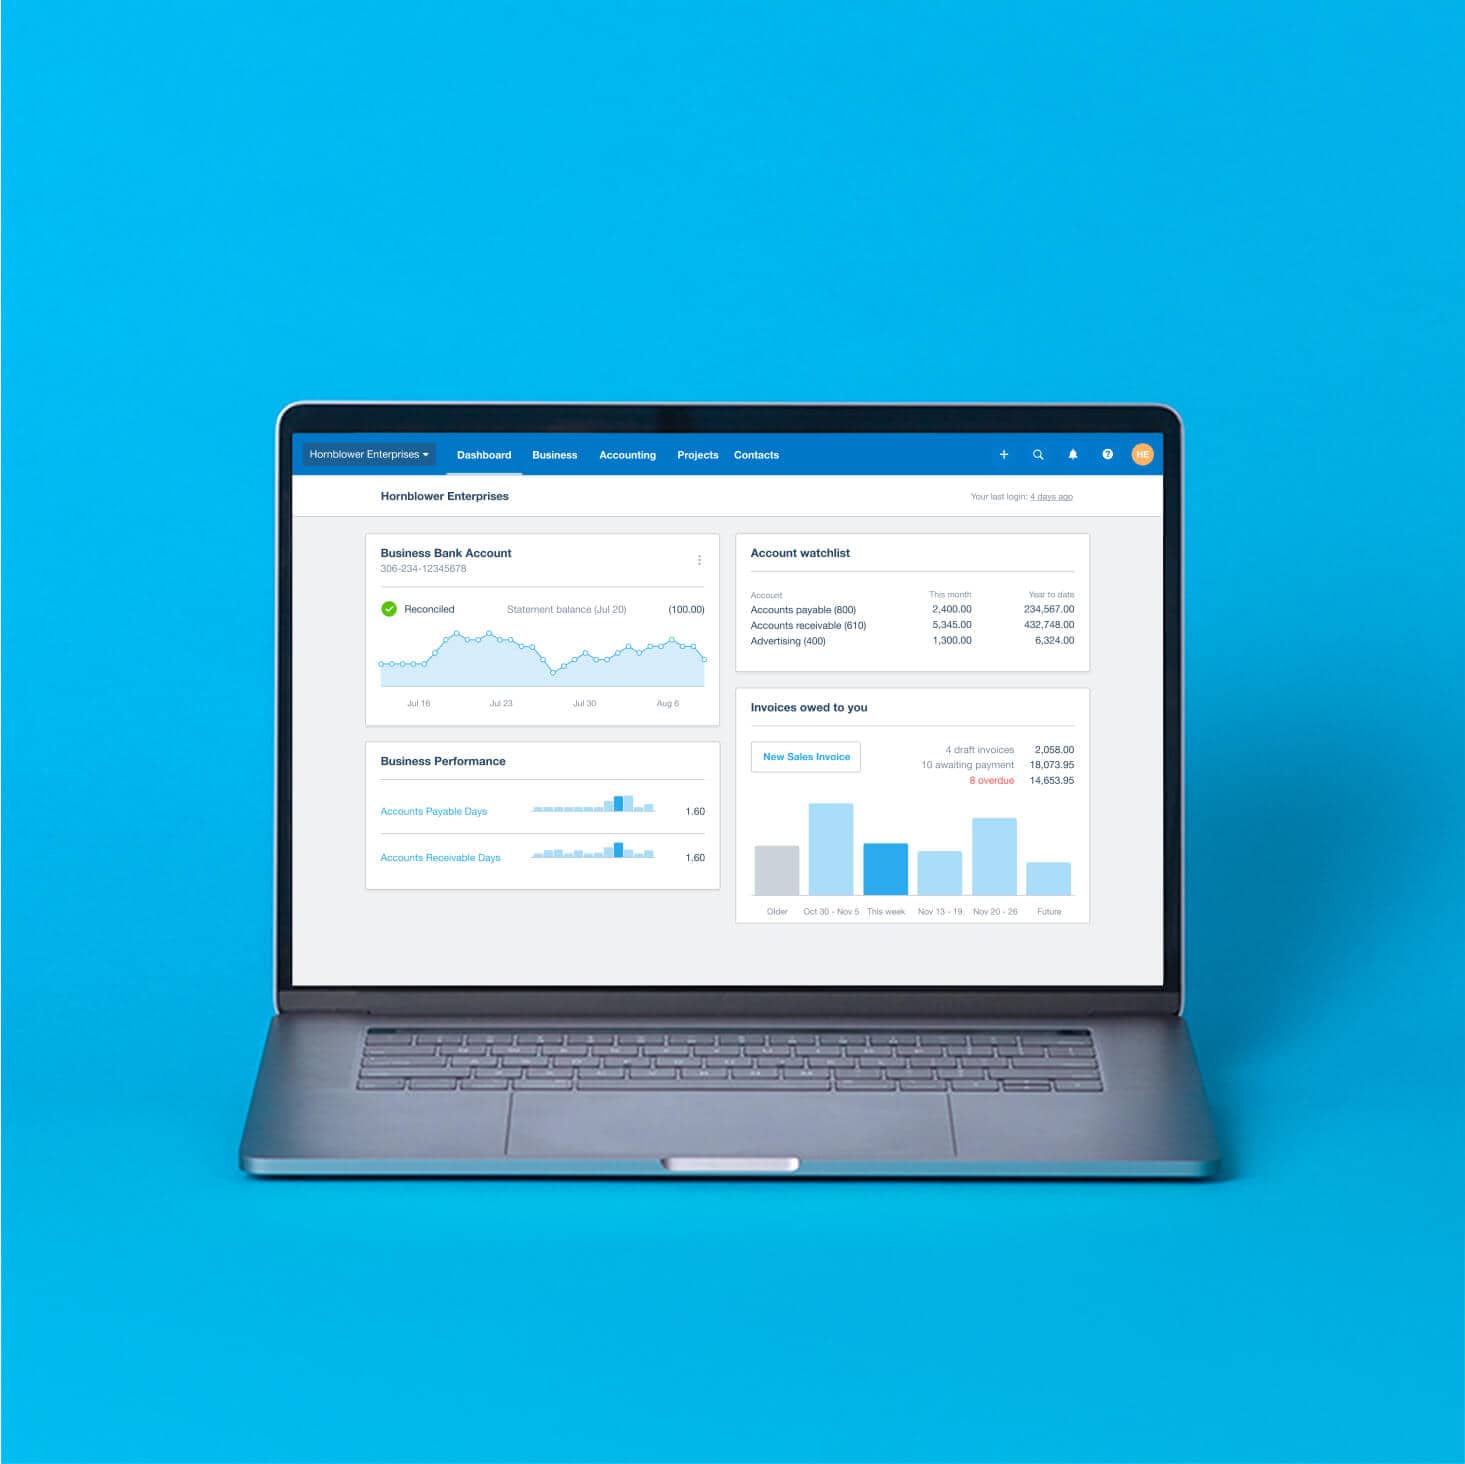 The Xero dashboard displays four panels: bank account summary, account watchlist, business performance, and invoices.